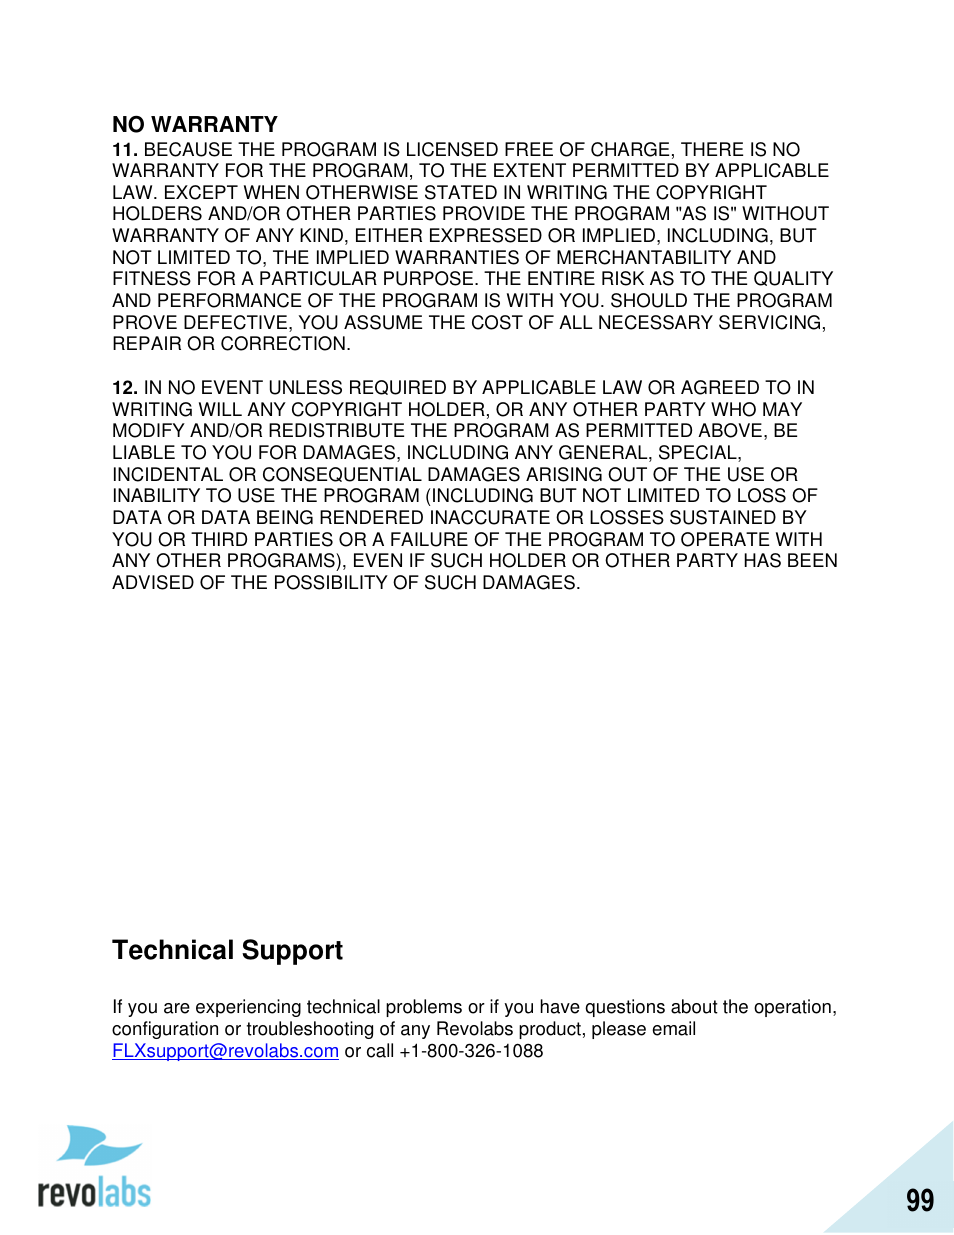 Technical support | Revolabs FLX2 VoIP Advanced User Manual | Page 99 / 99